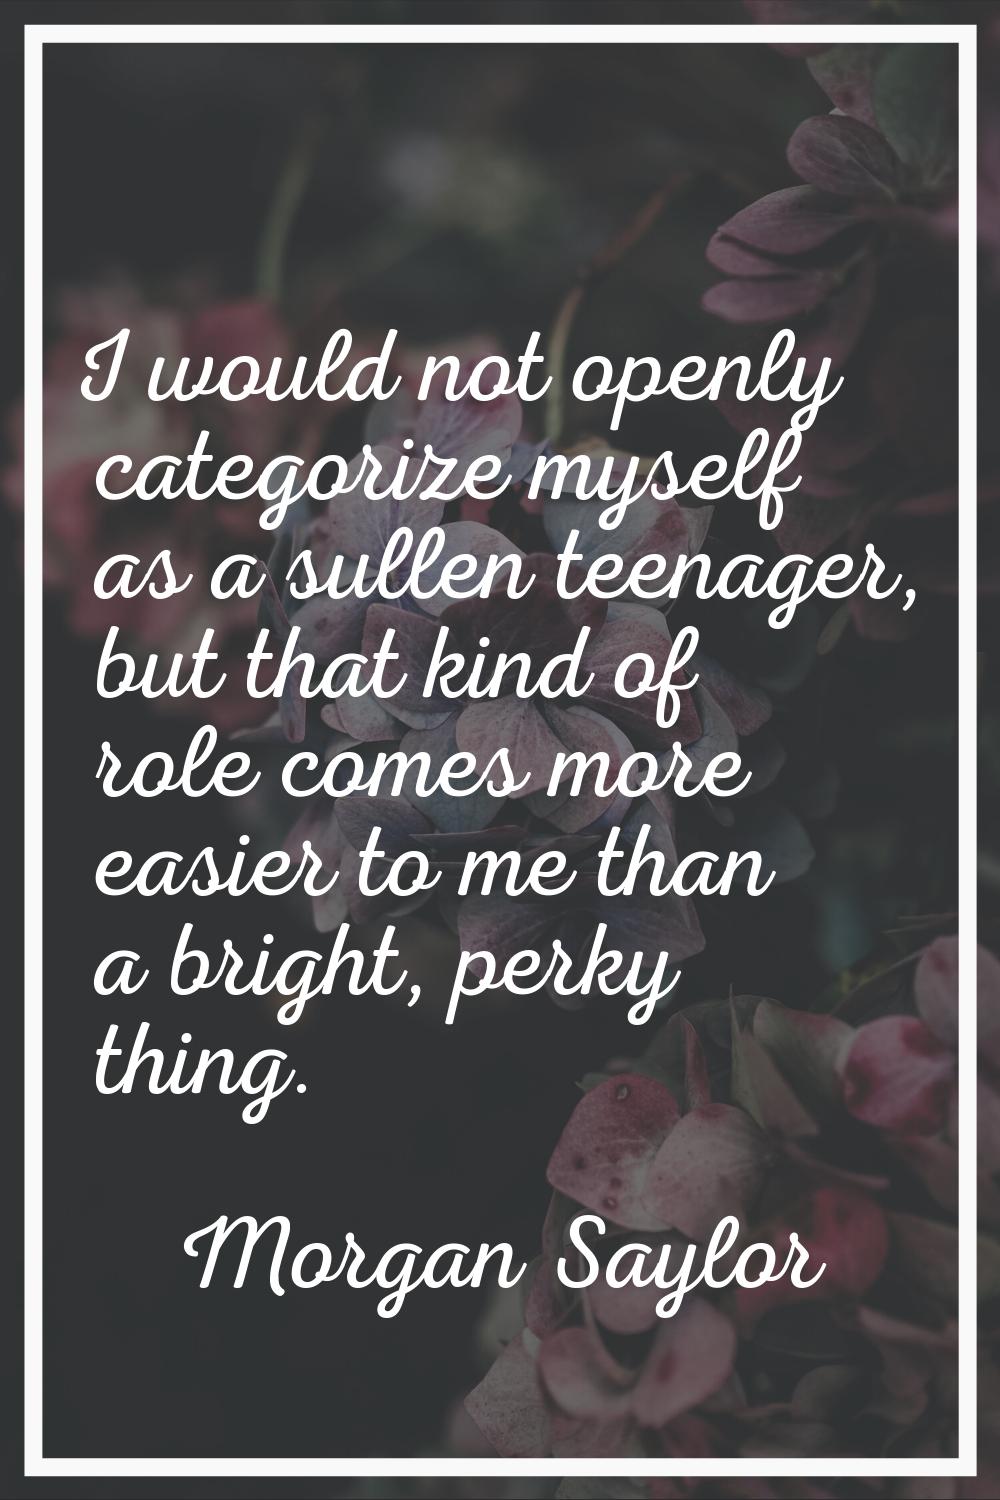 I would not openly categorize myself as a sullen teenager, but that kind of role comes more easier 